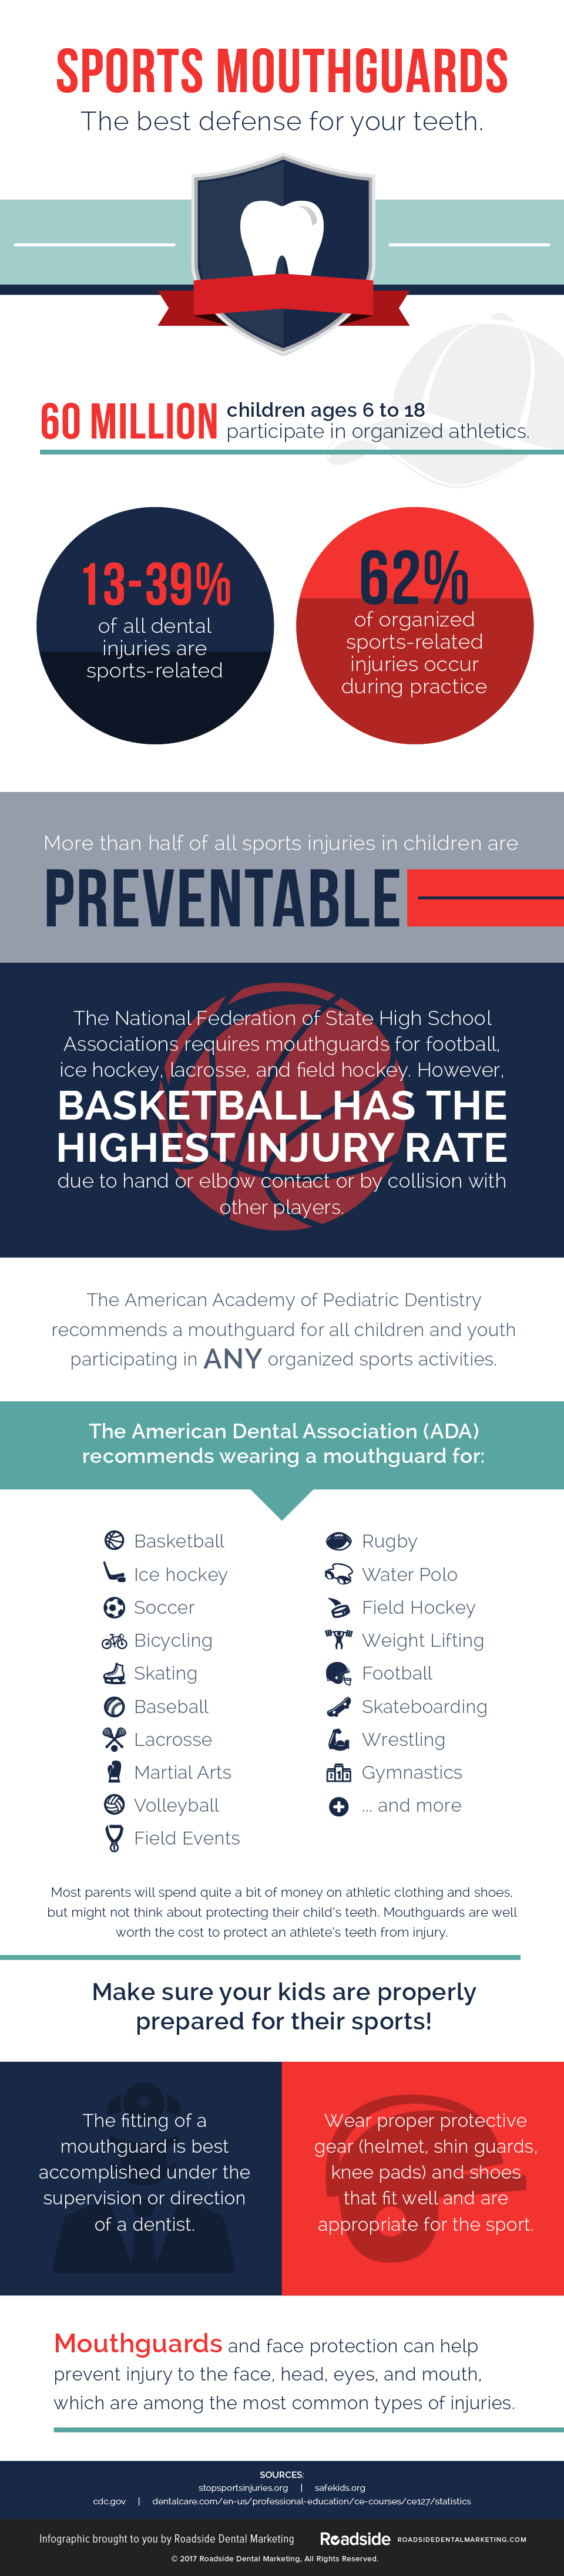 Infographic with sports mouthguards statistics